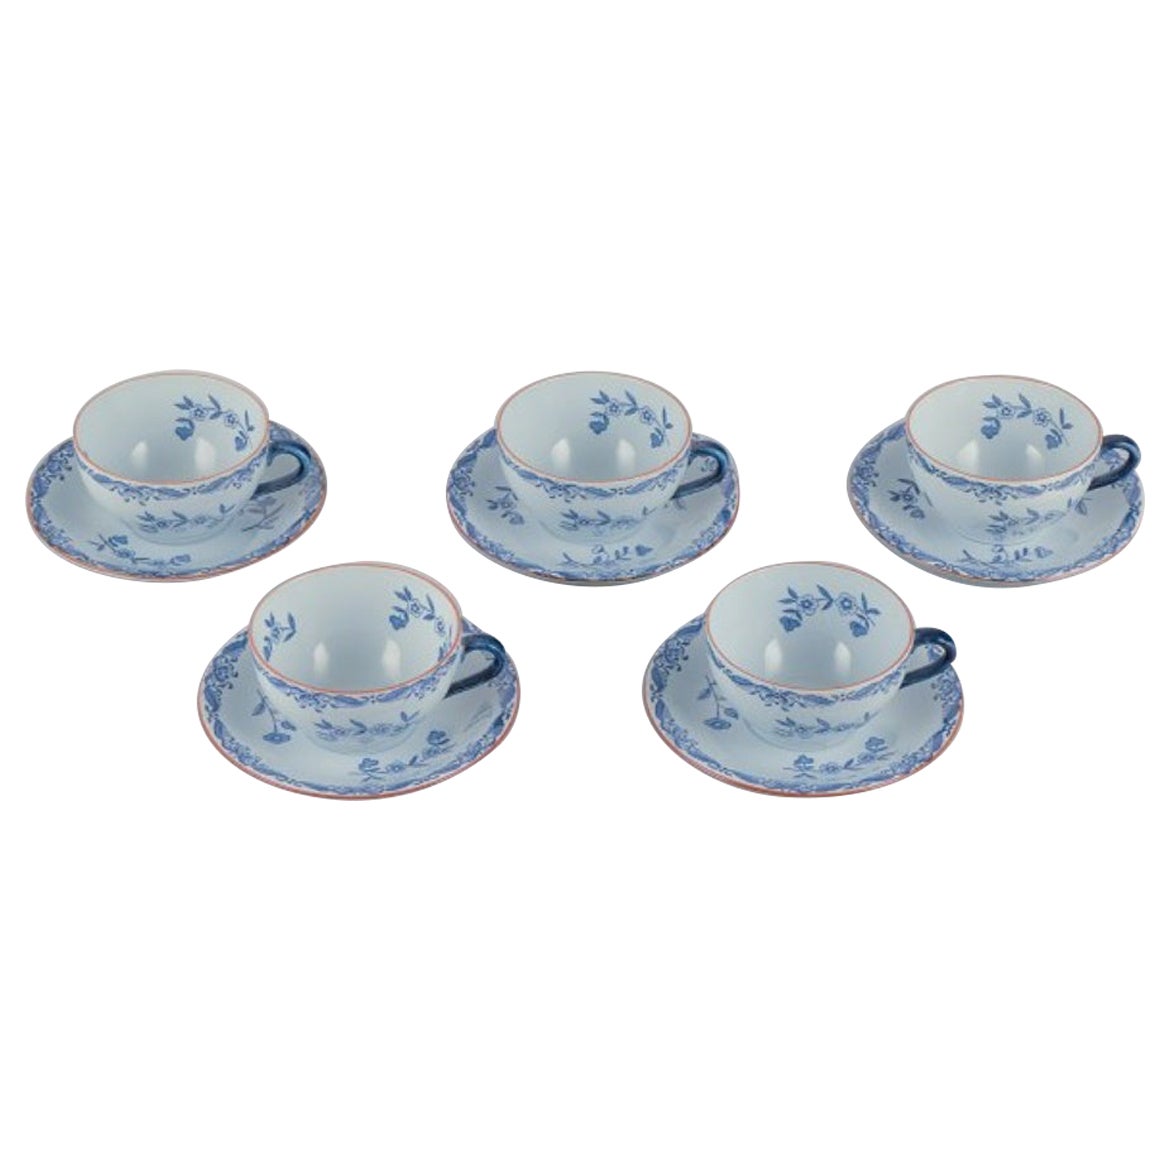 Rörstrand, Sweden. Set of five "Ostindia" coffee cups and saucers in faience.  For Sale